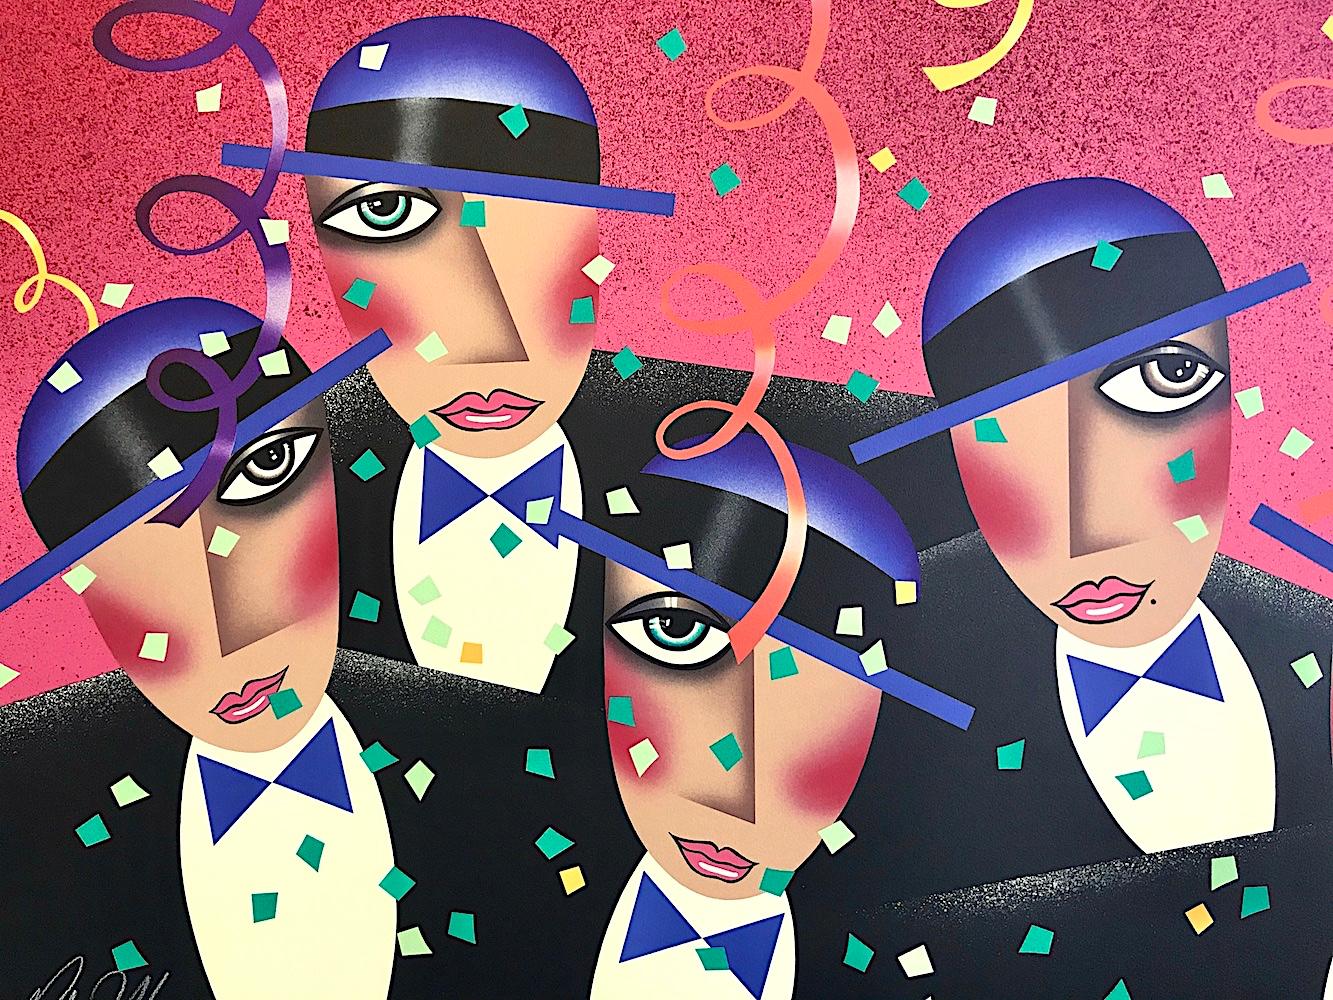 CAST PARTY Signed Lithograph, Party Portrait Confetti, Broadway Show, Black Pink - Print by Robin Morris